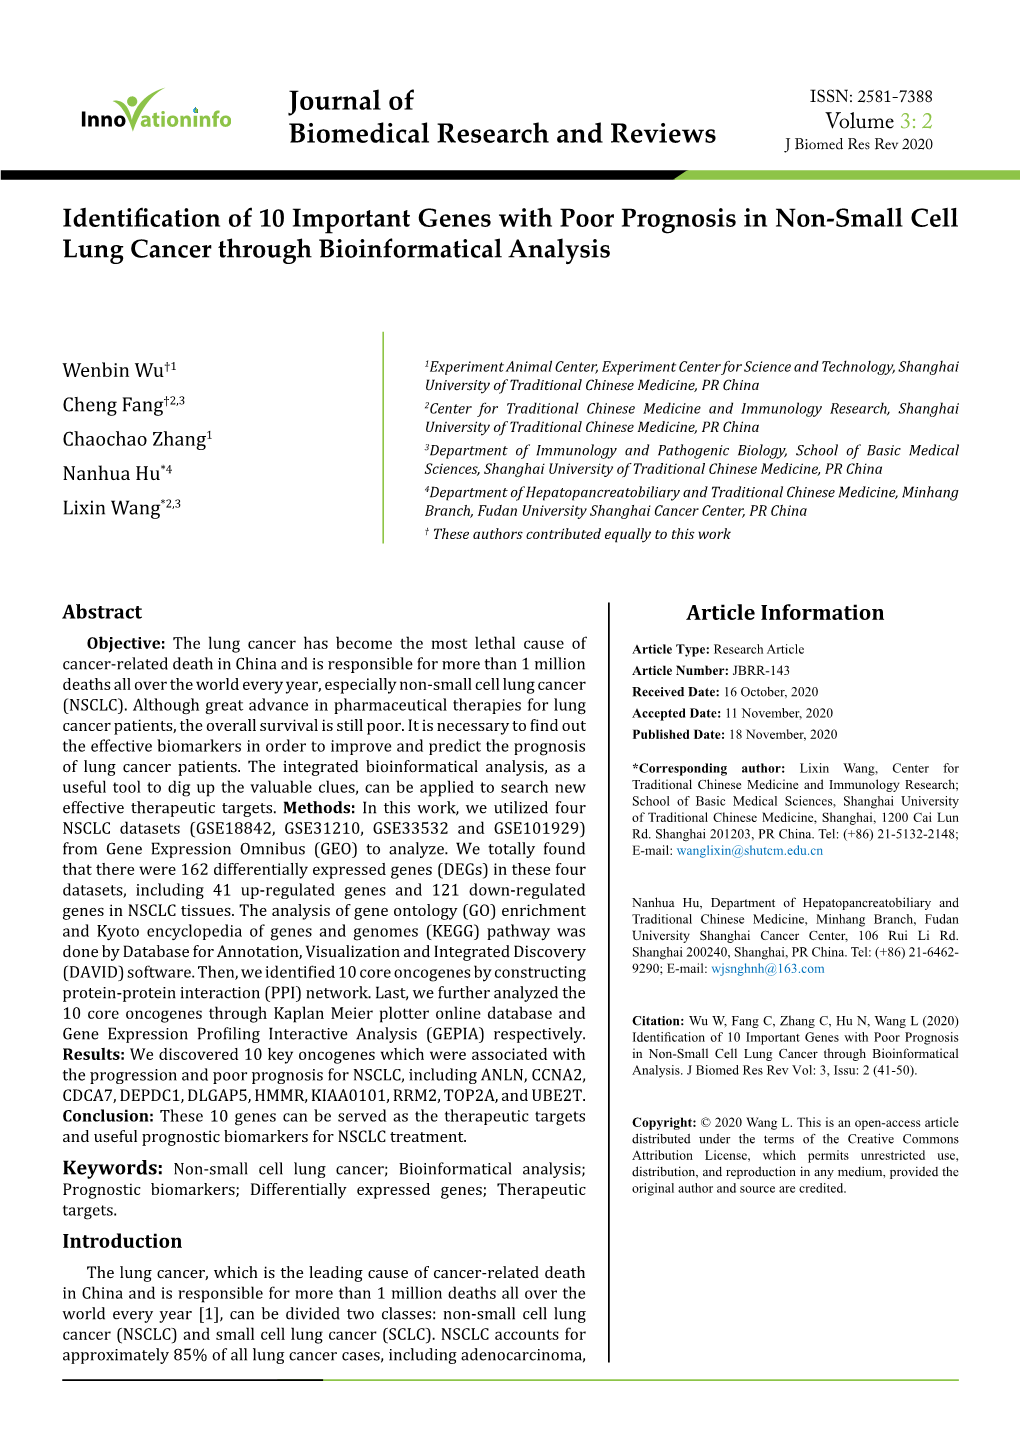 Identification of 10 Important Genes with Poor Prognosis in Non-Small Cell Lung Cancer Through Bioinformatical Analysis